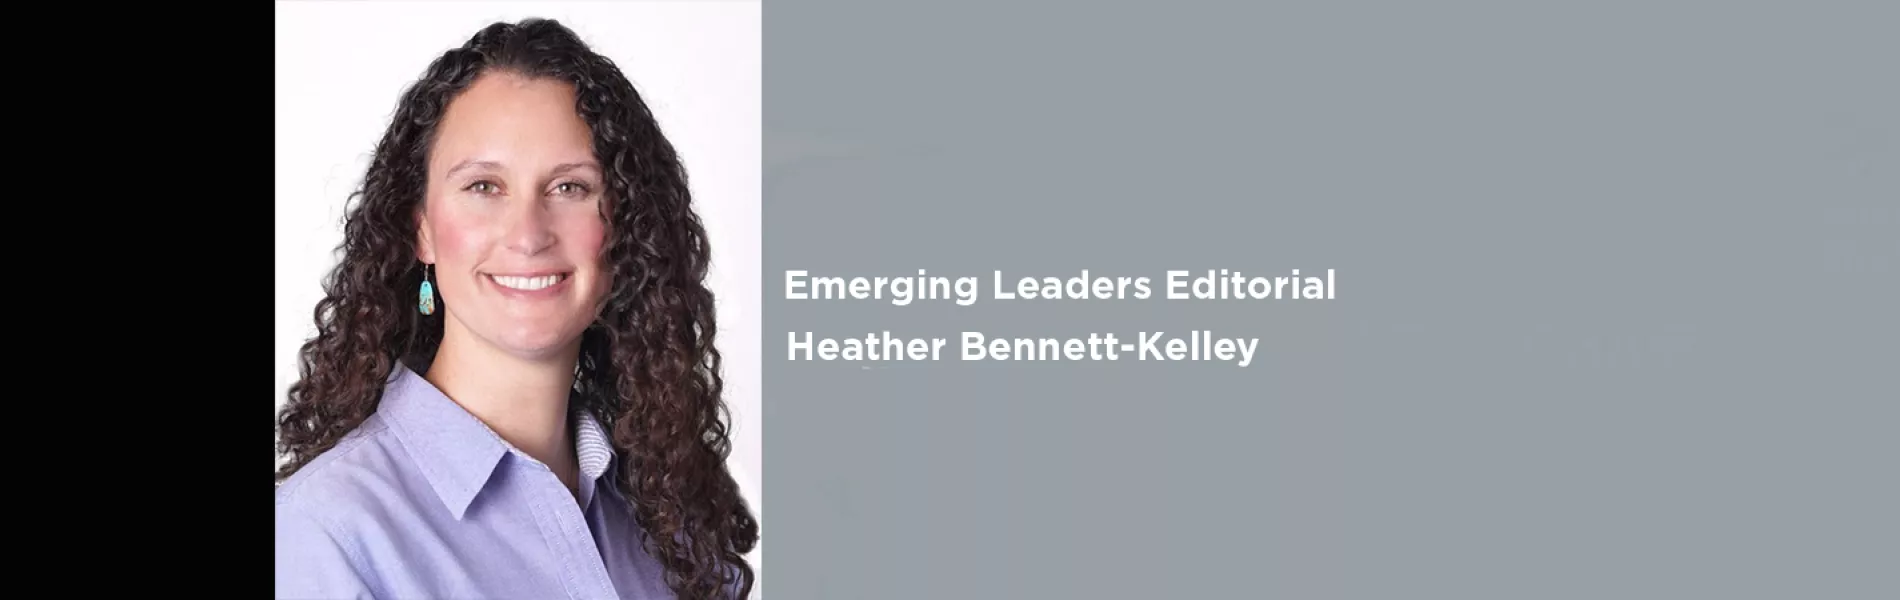 Emerging Leaders Editorial: Building Connection & Support